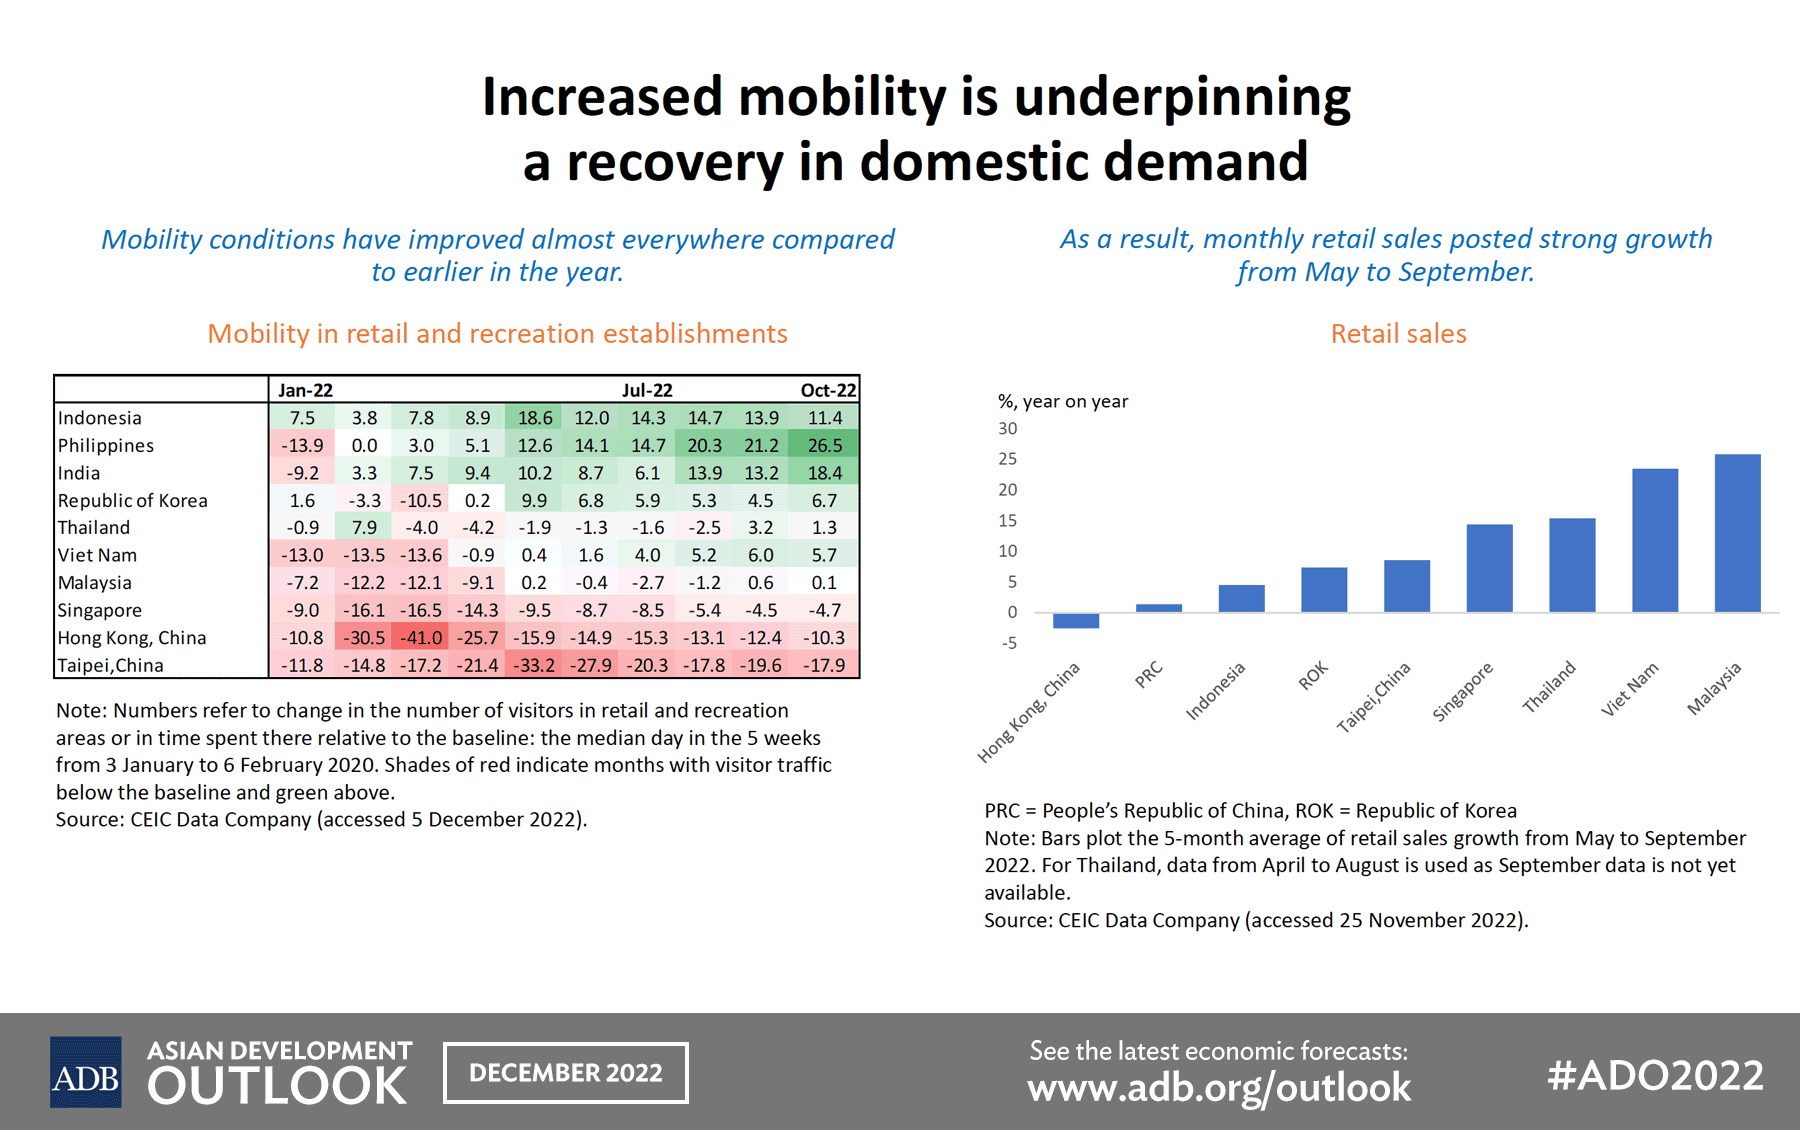 Increased mobility is underpinning a recovery in domestic demand